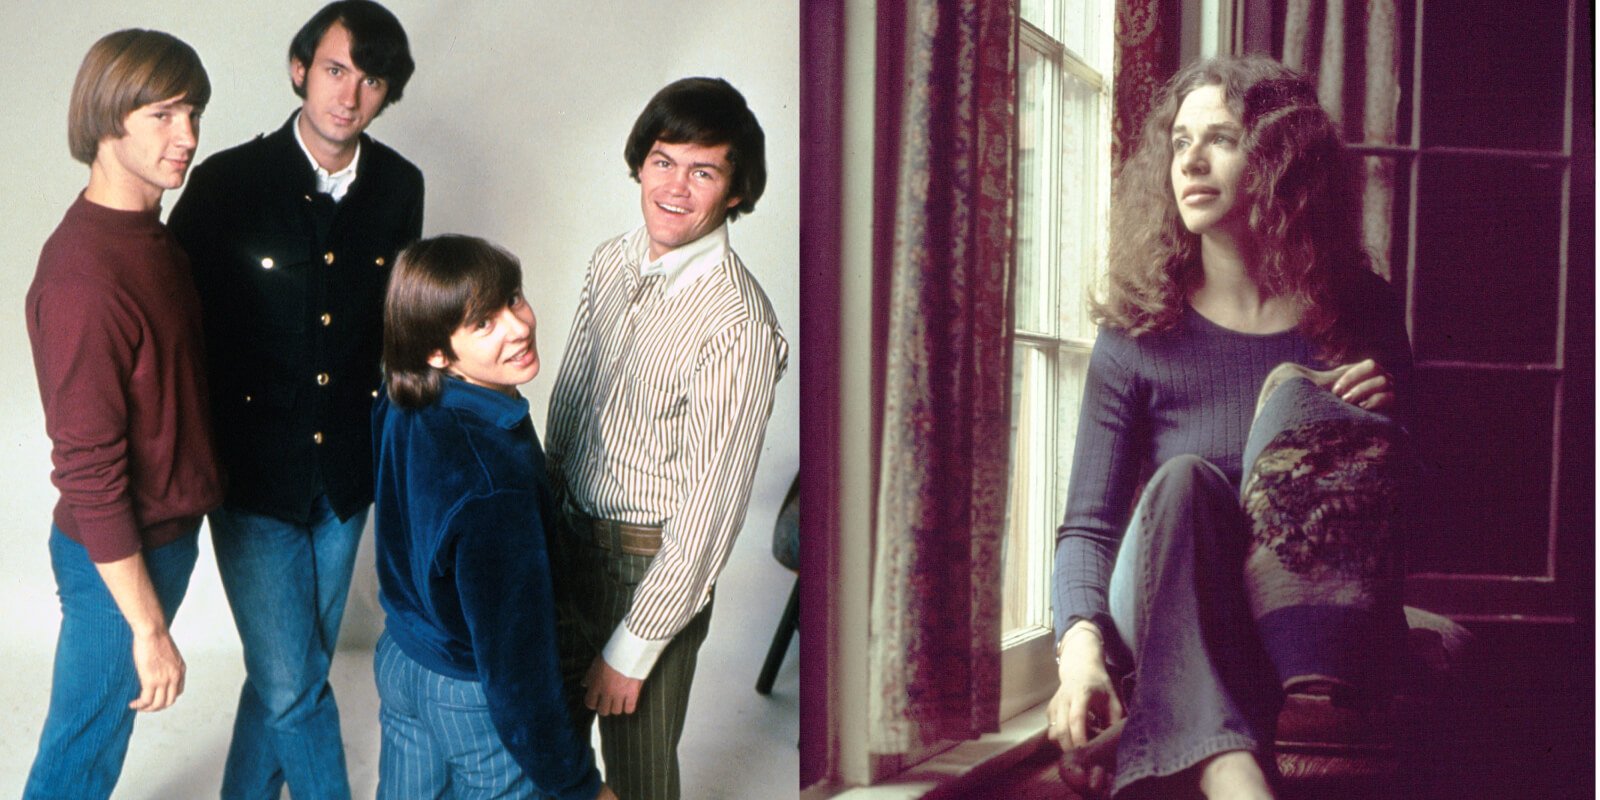 Carole King wrote many of The Monkees most beloved hits alongside her husband Gerry Goffin.